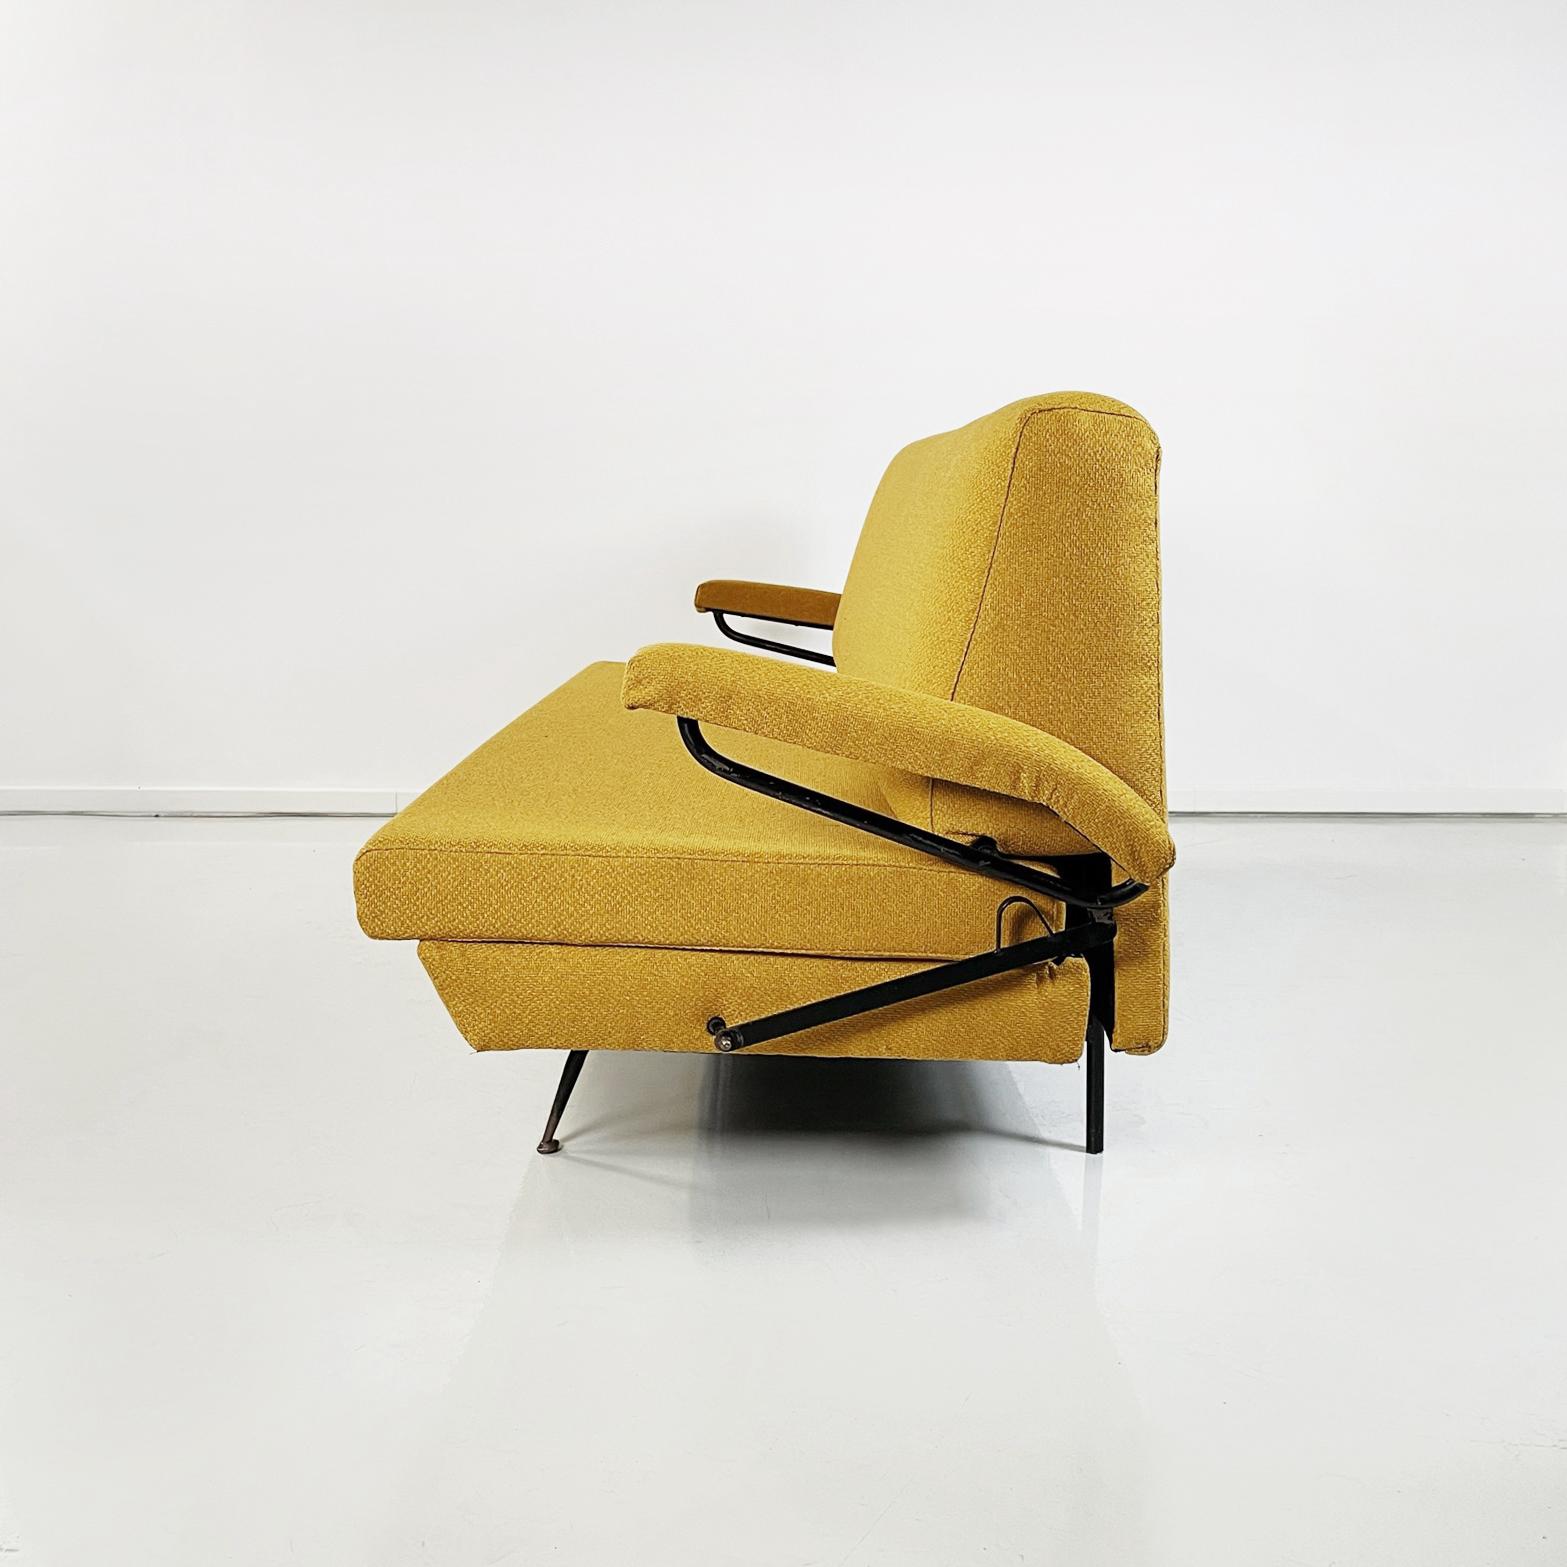 Mid-20th Century Italian Mid-Century Modern Sofa and Bed in Yellow Fabric and Black Metal, 1960s